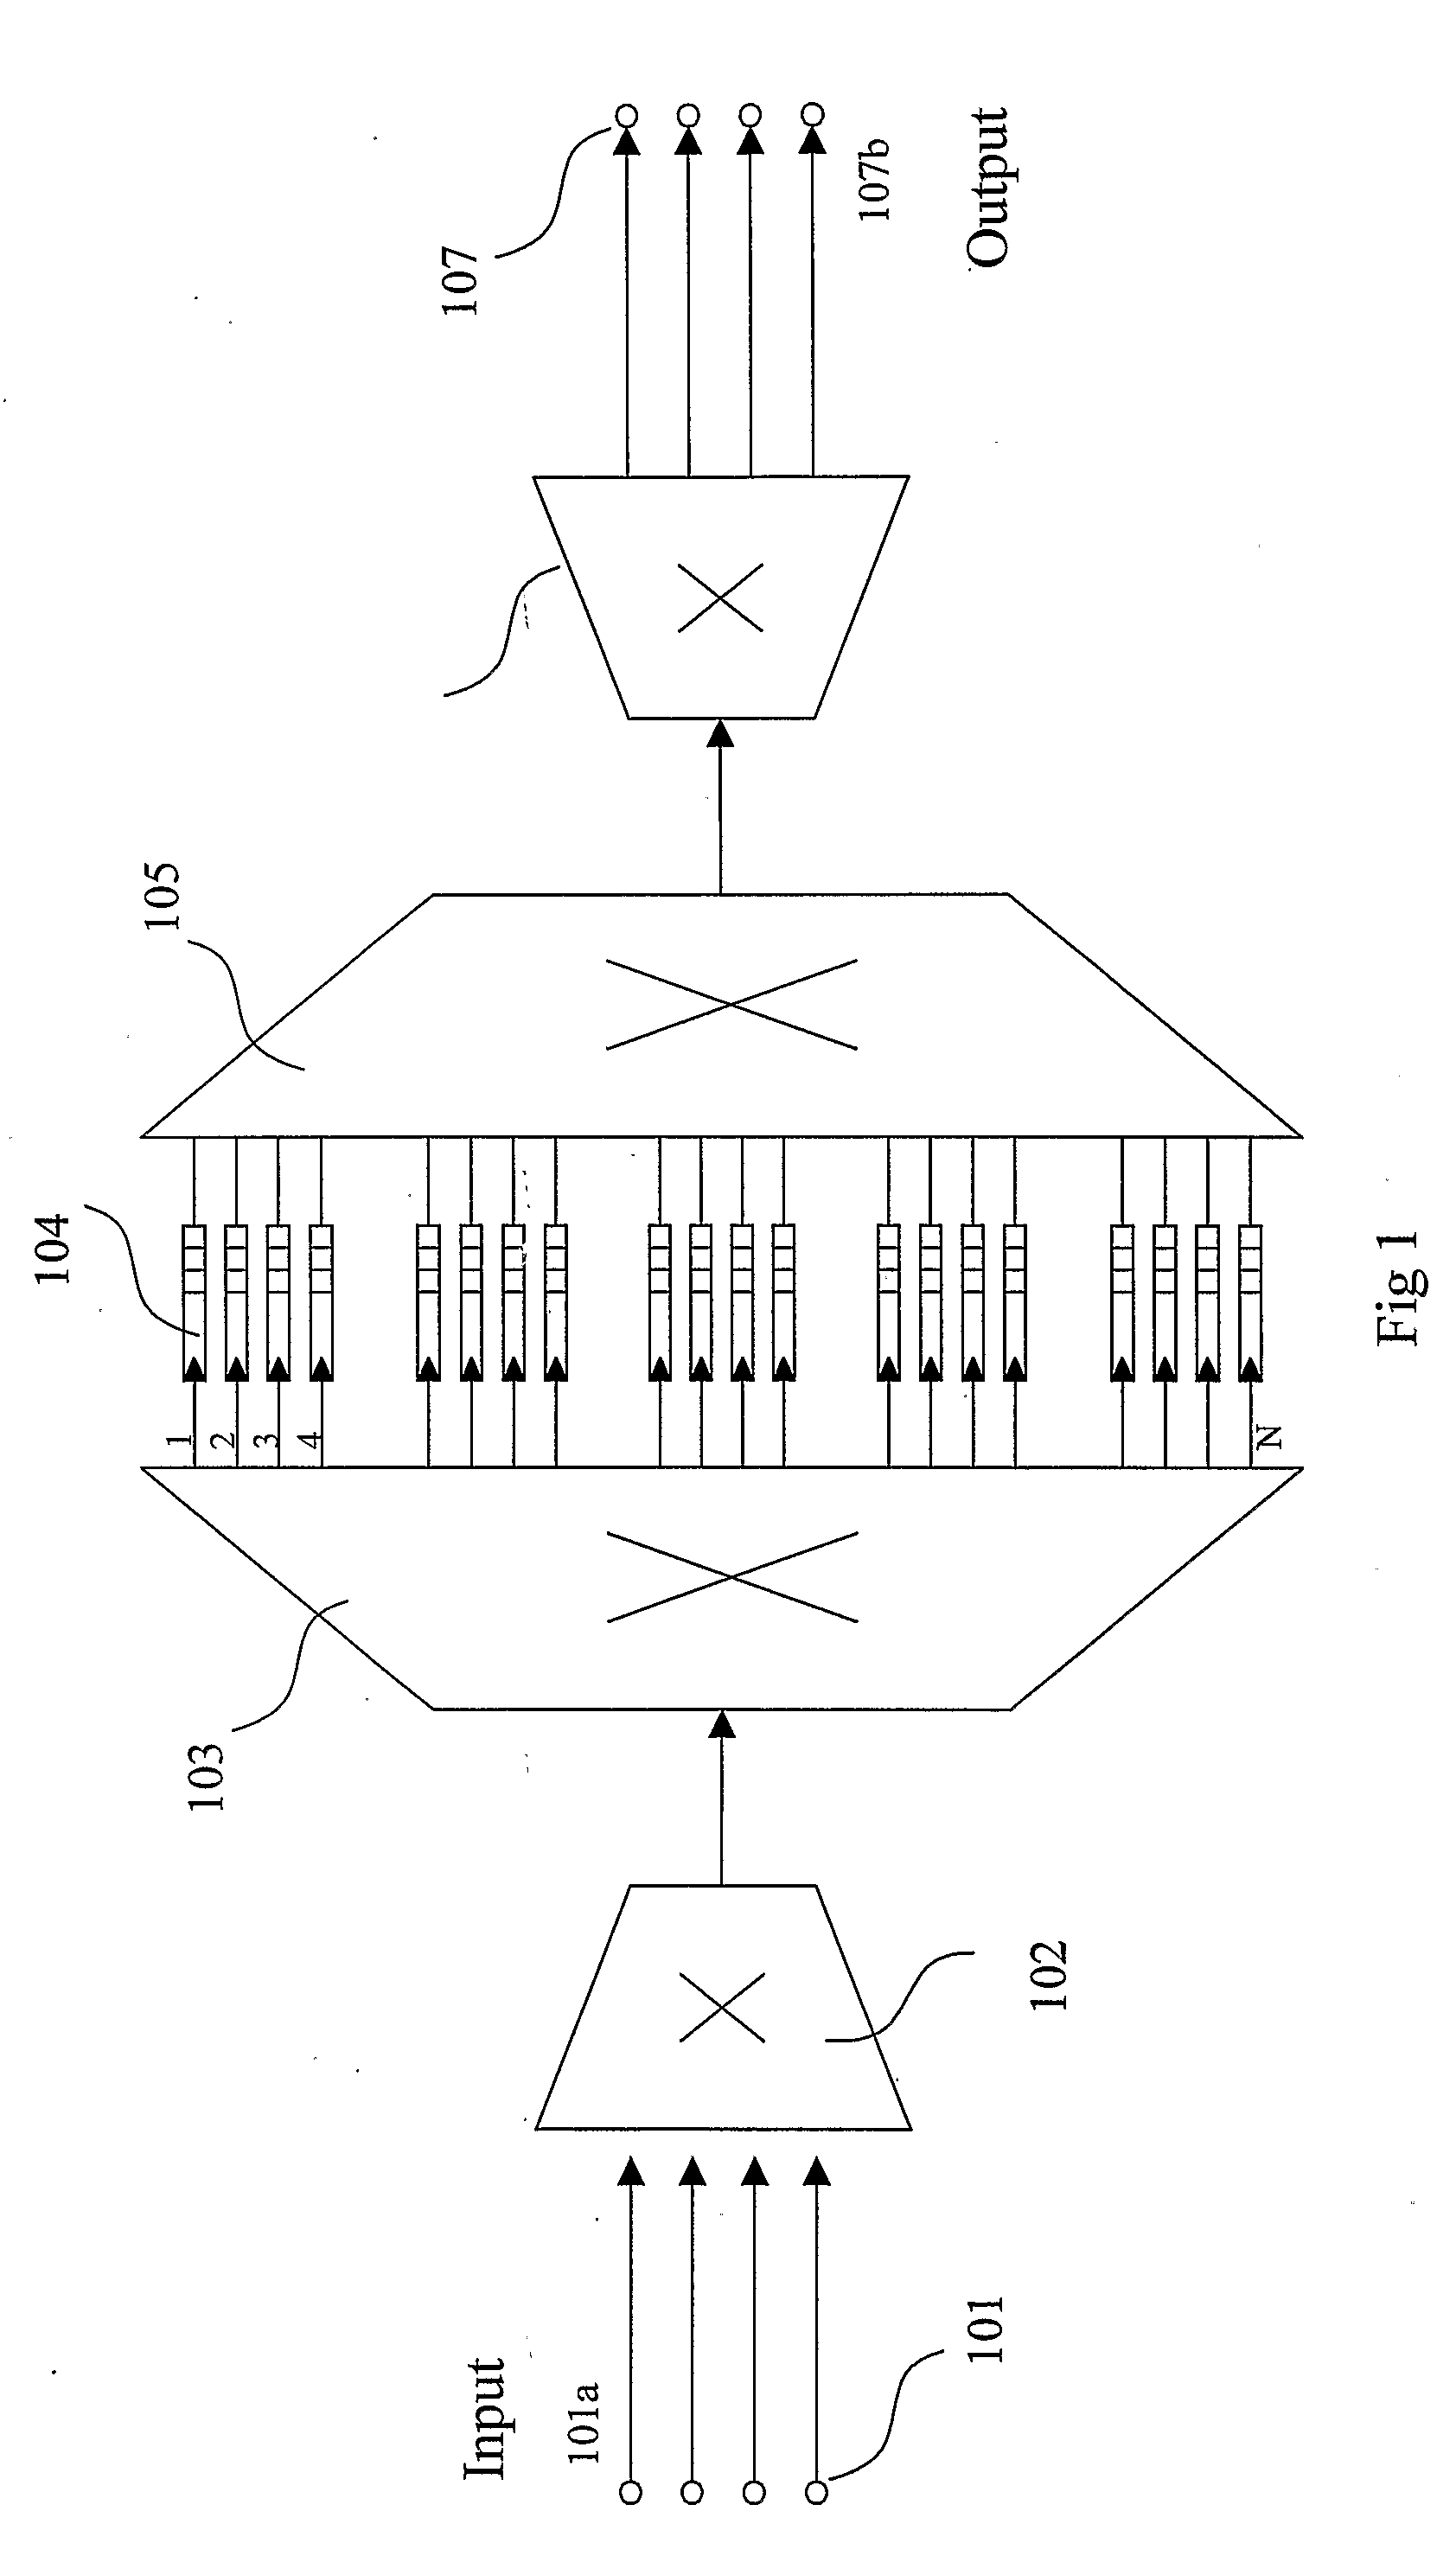 Compact Load Balanced Switching Structures for Packet Based Communication Networks